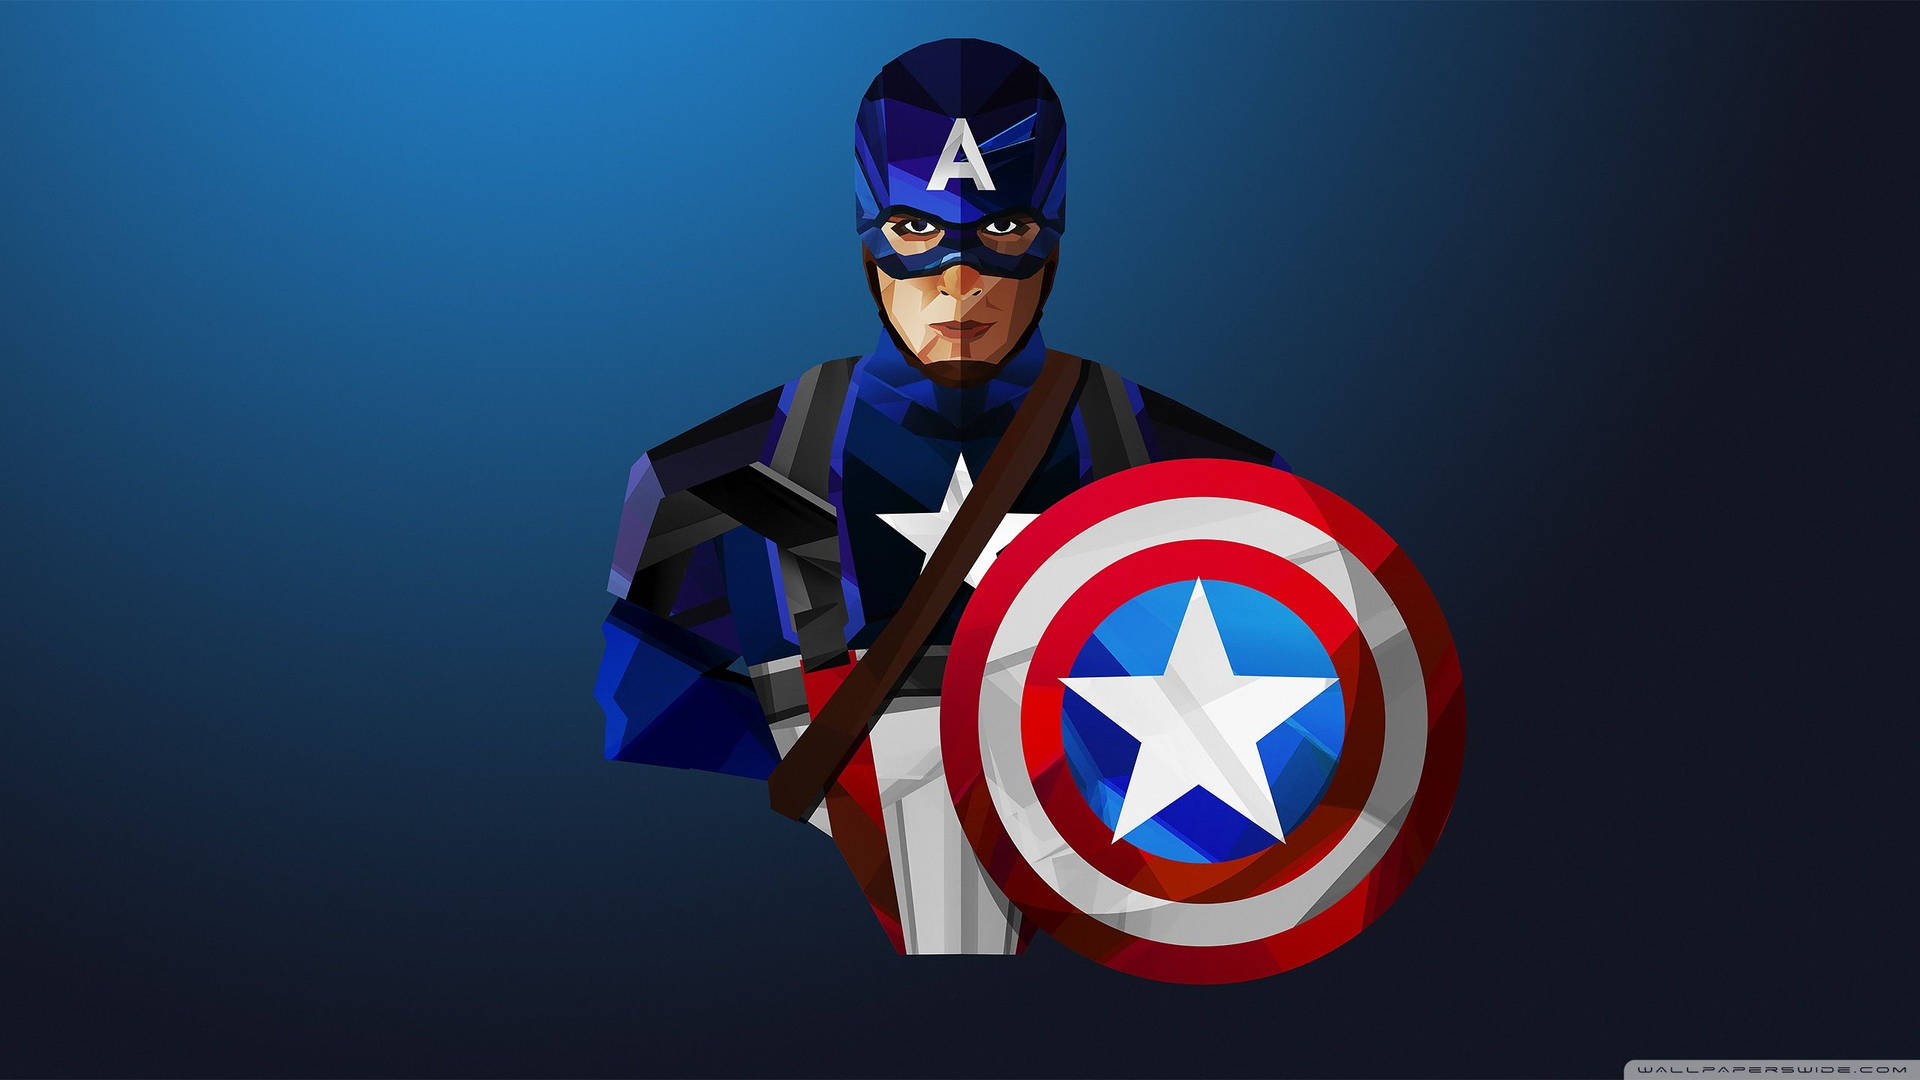 The iconic Captain America stands ready to fight for justice Wallpaper